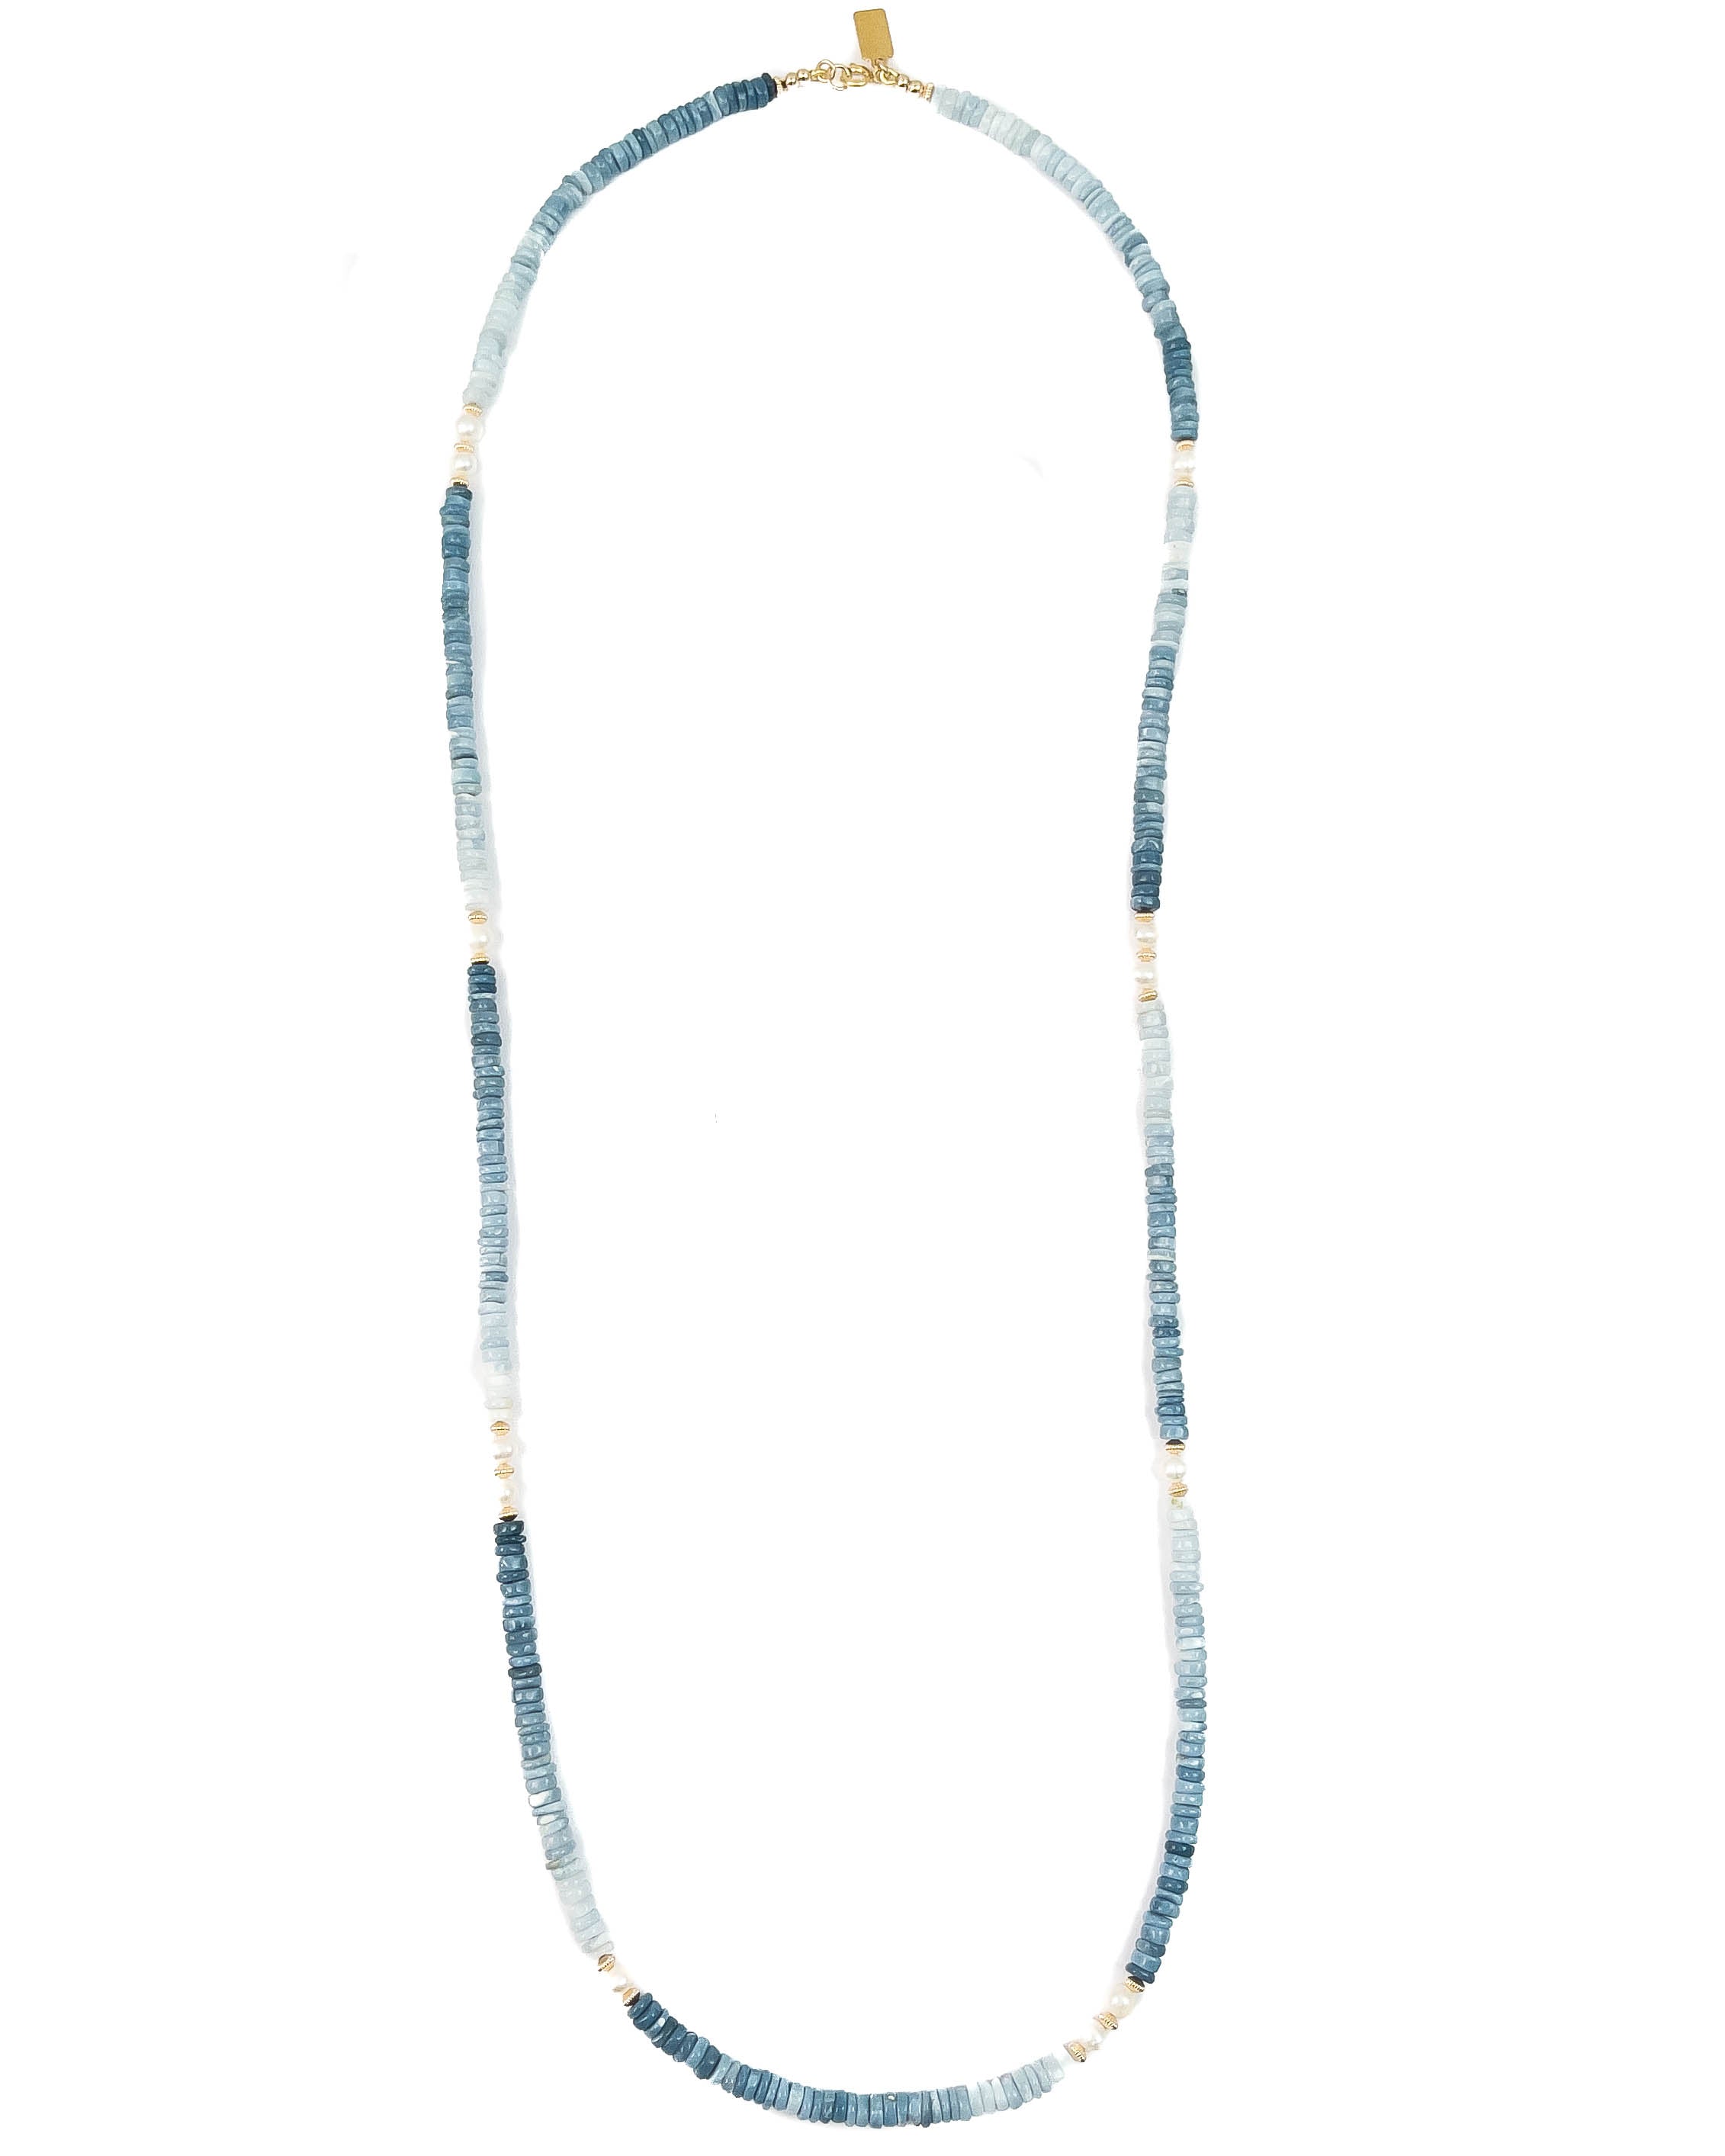 White Freshwater Pearl and Blue Owyhee Opal Strand Double Wrap Necklace